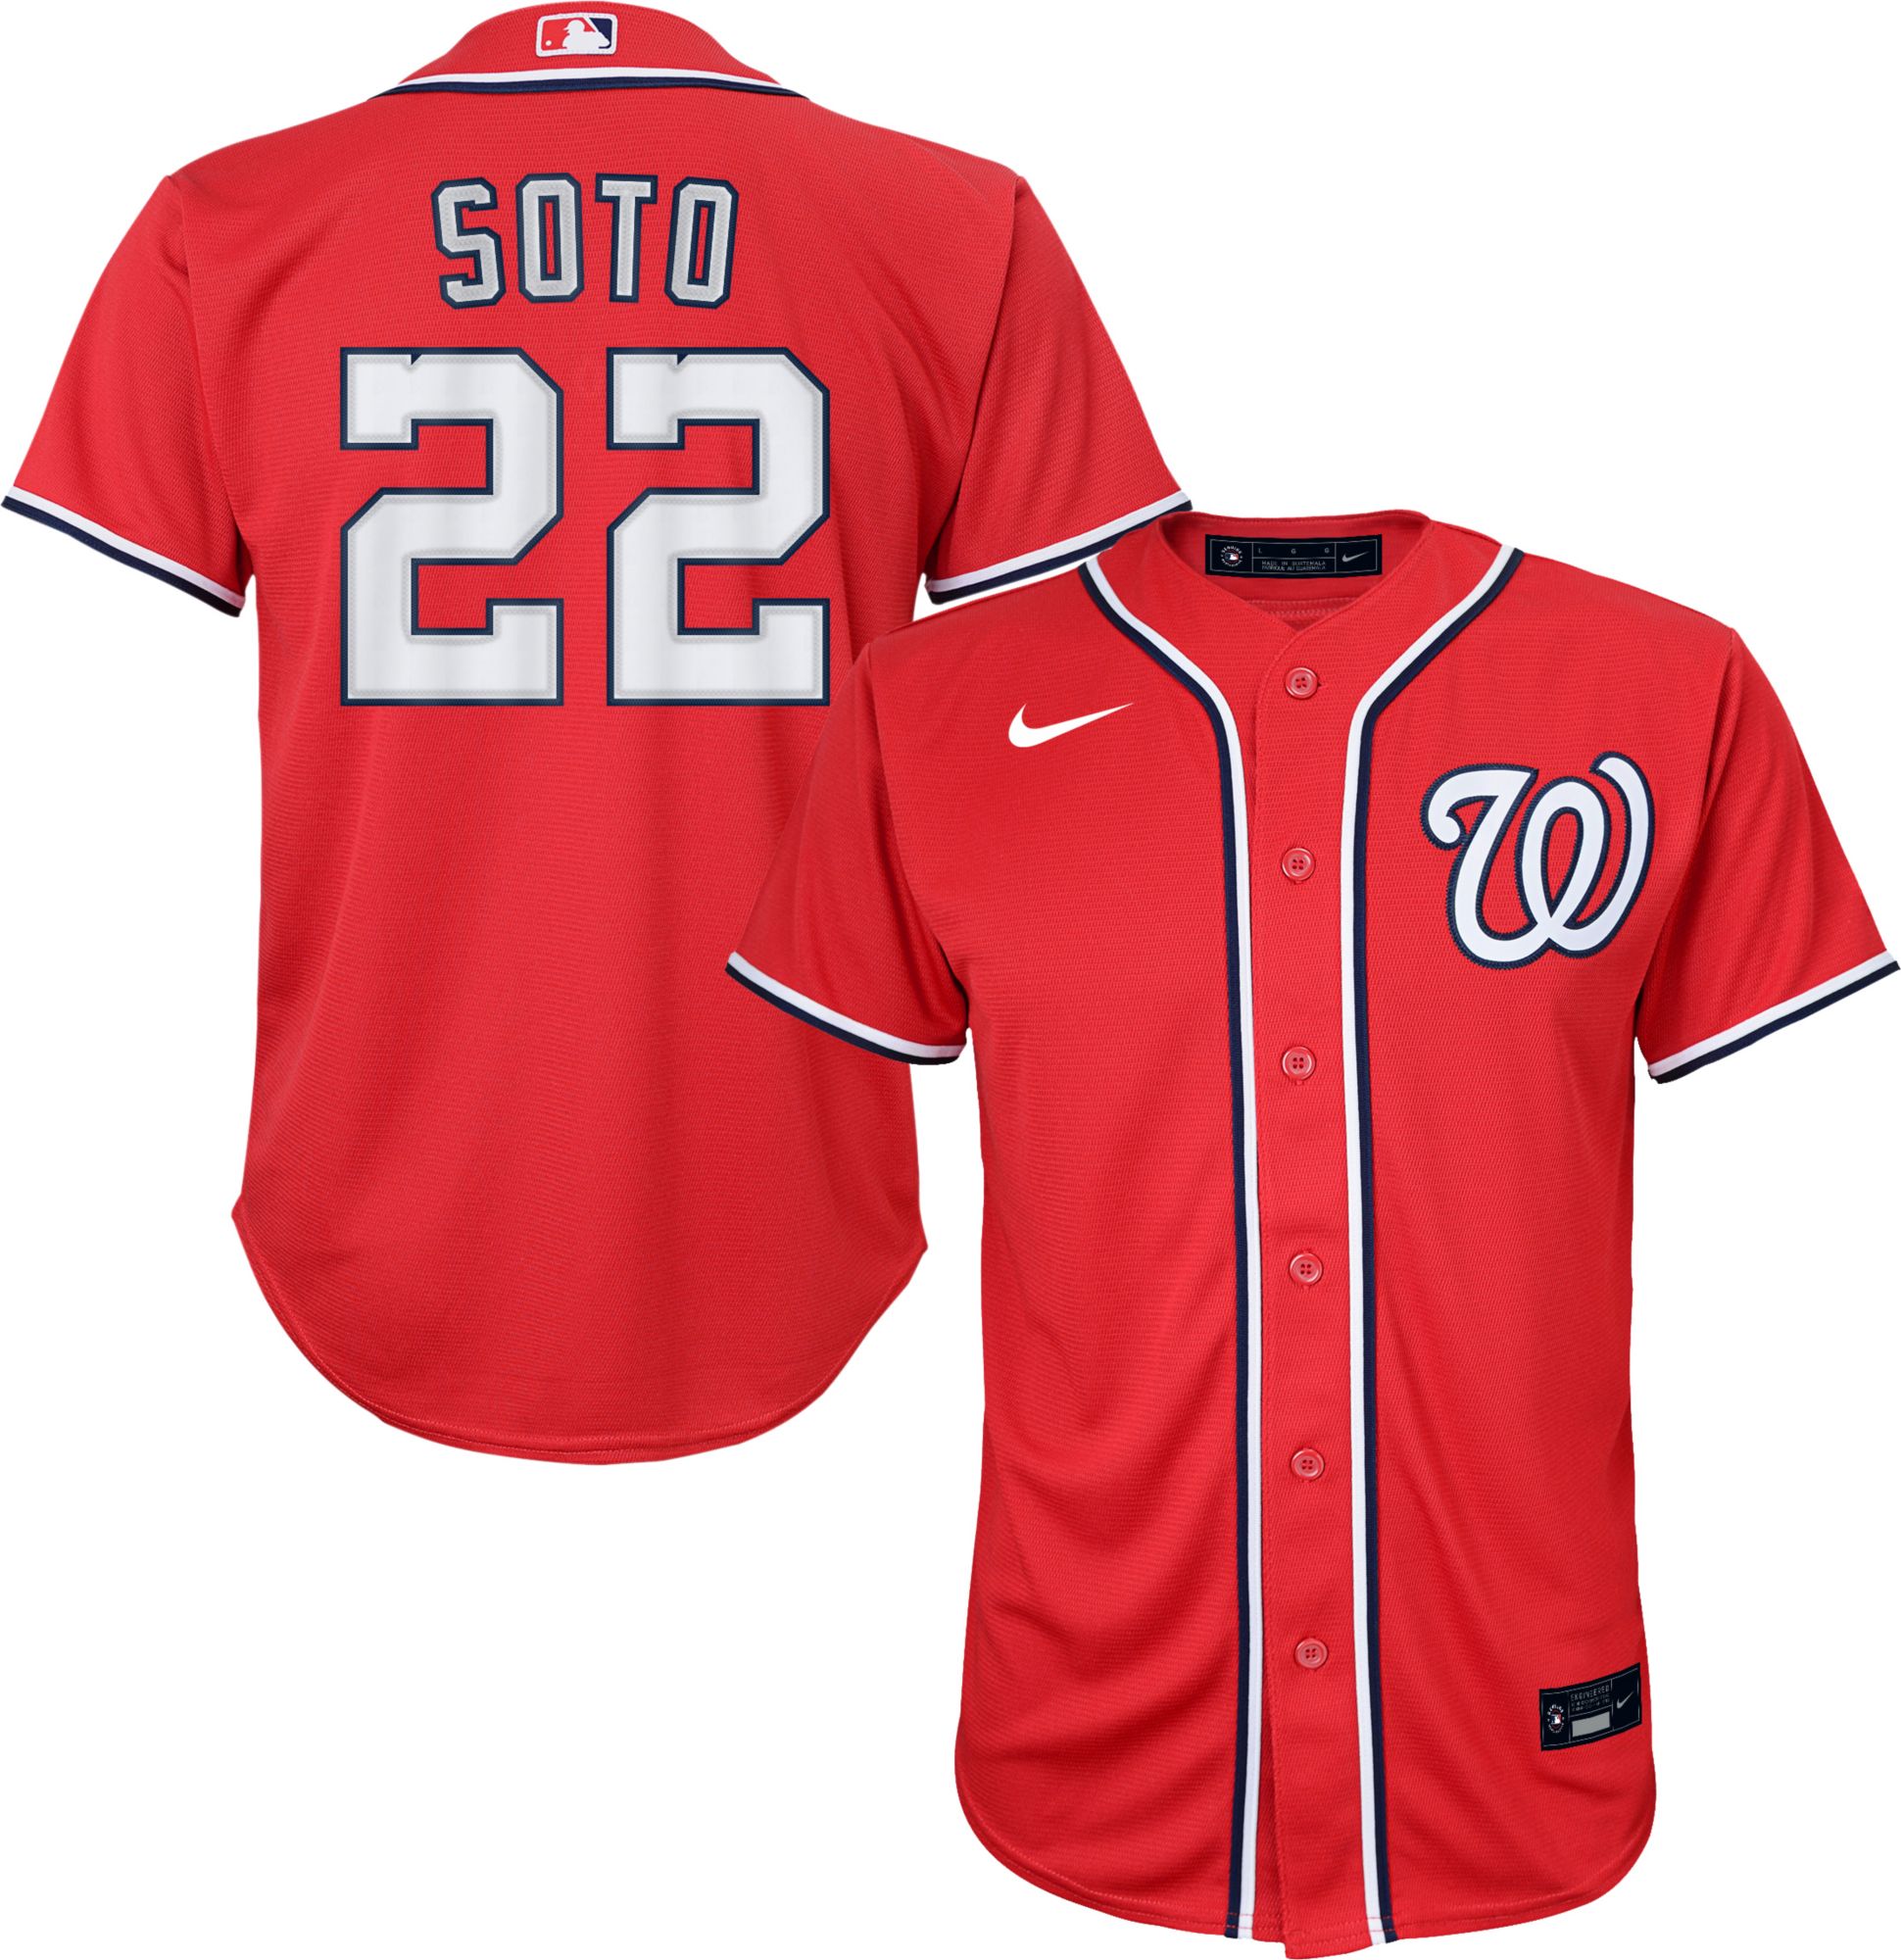 soto youth jersey